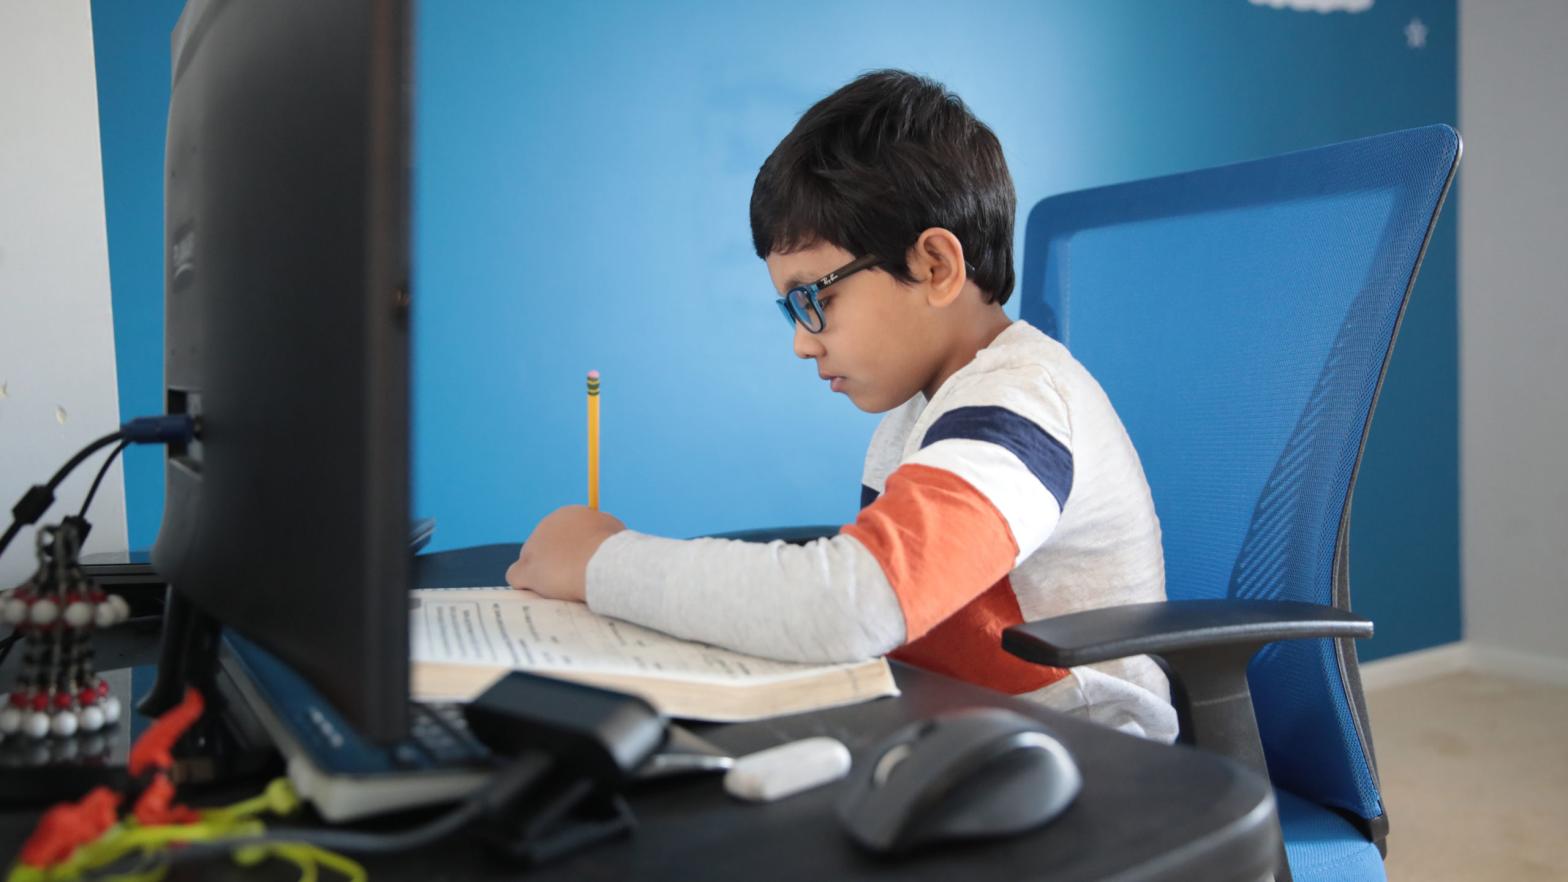 Seven-year-old Hamza Haqqani, a second-grade student at Al-Huda Academy, uses a computer to participate in an online class with his teacher and classmates while at his home on May 1 in Bartlett, Ill. (Photo: Scott Olson, Getty Images)